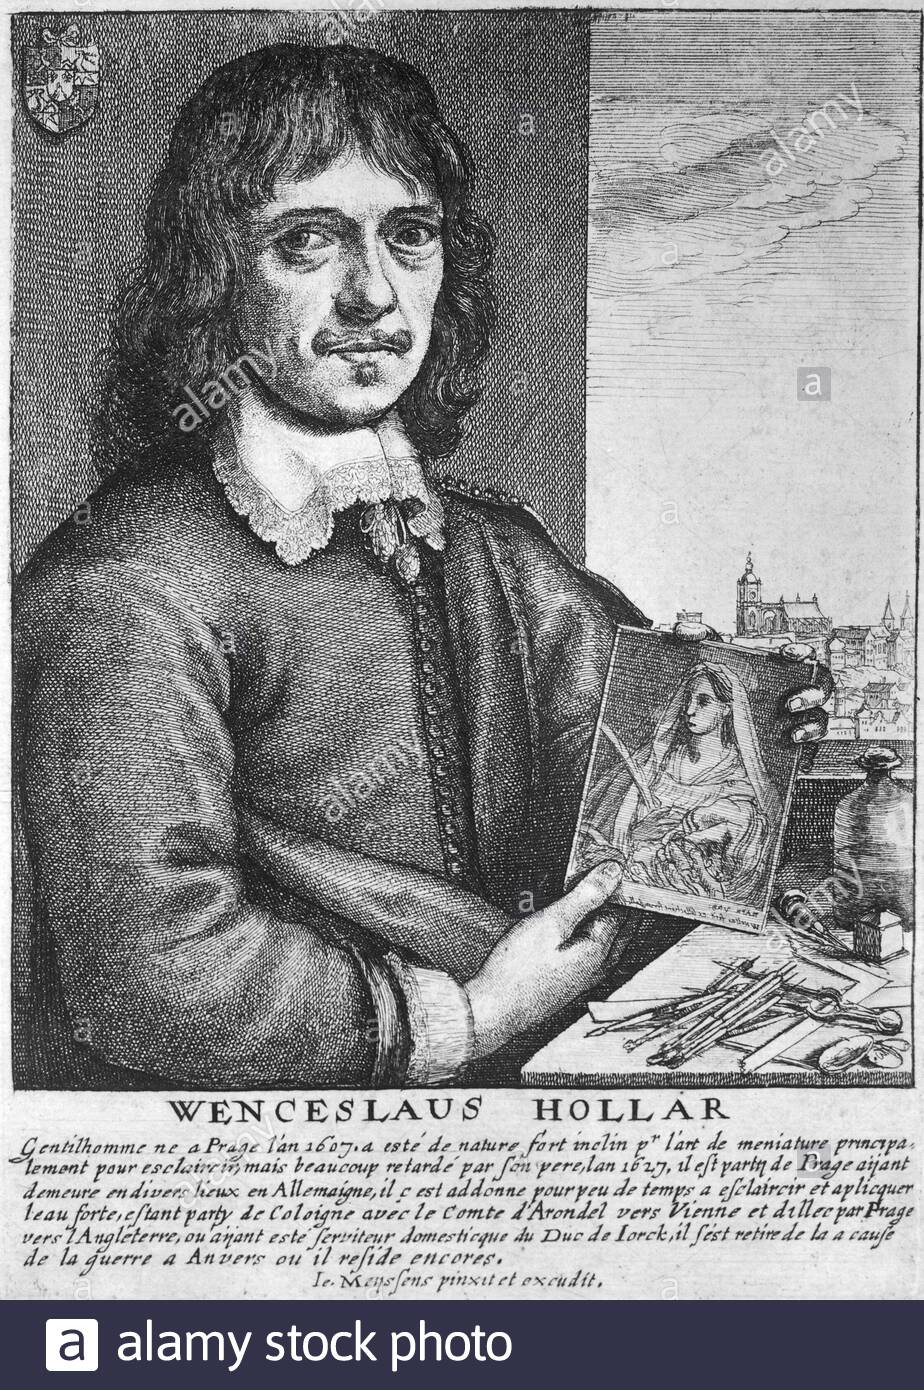 Wenceslaus Hollar portrait, 1607 – 1677, was a prolific and accomplished Bohemian graphic artist of the 17th century, who spent much of his life in England Stock Photo